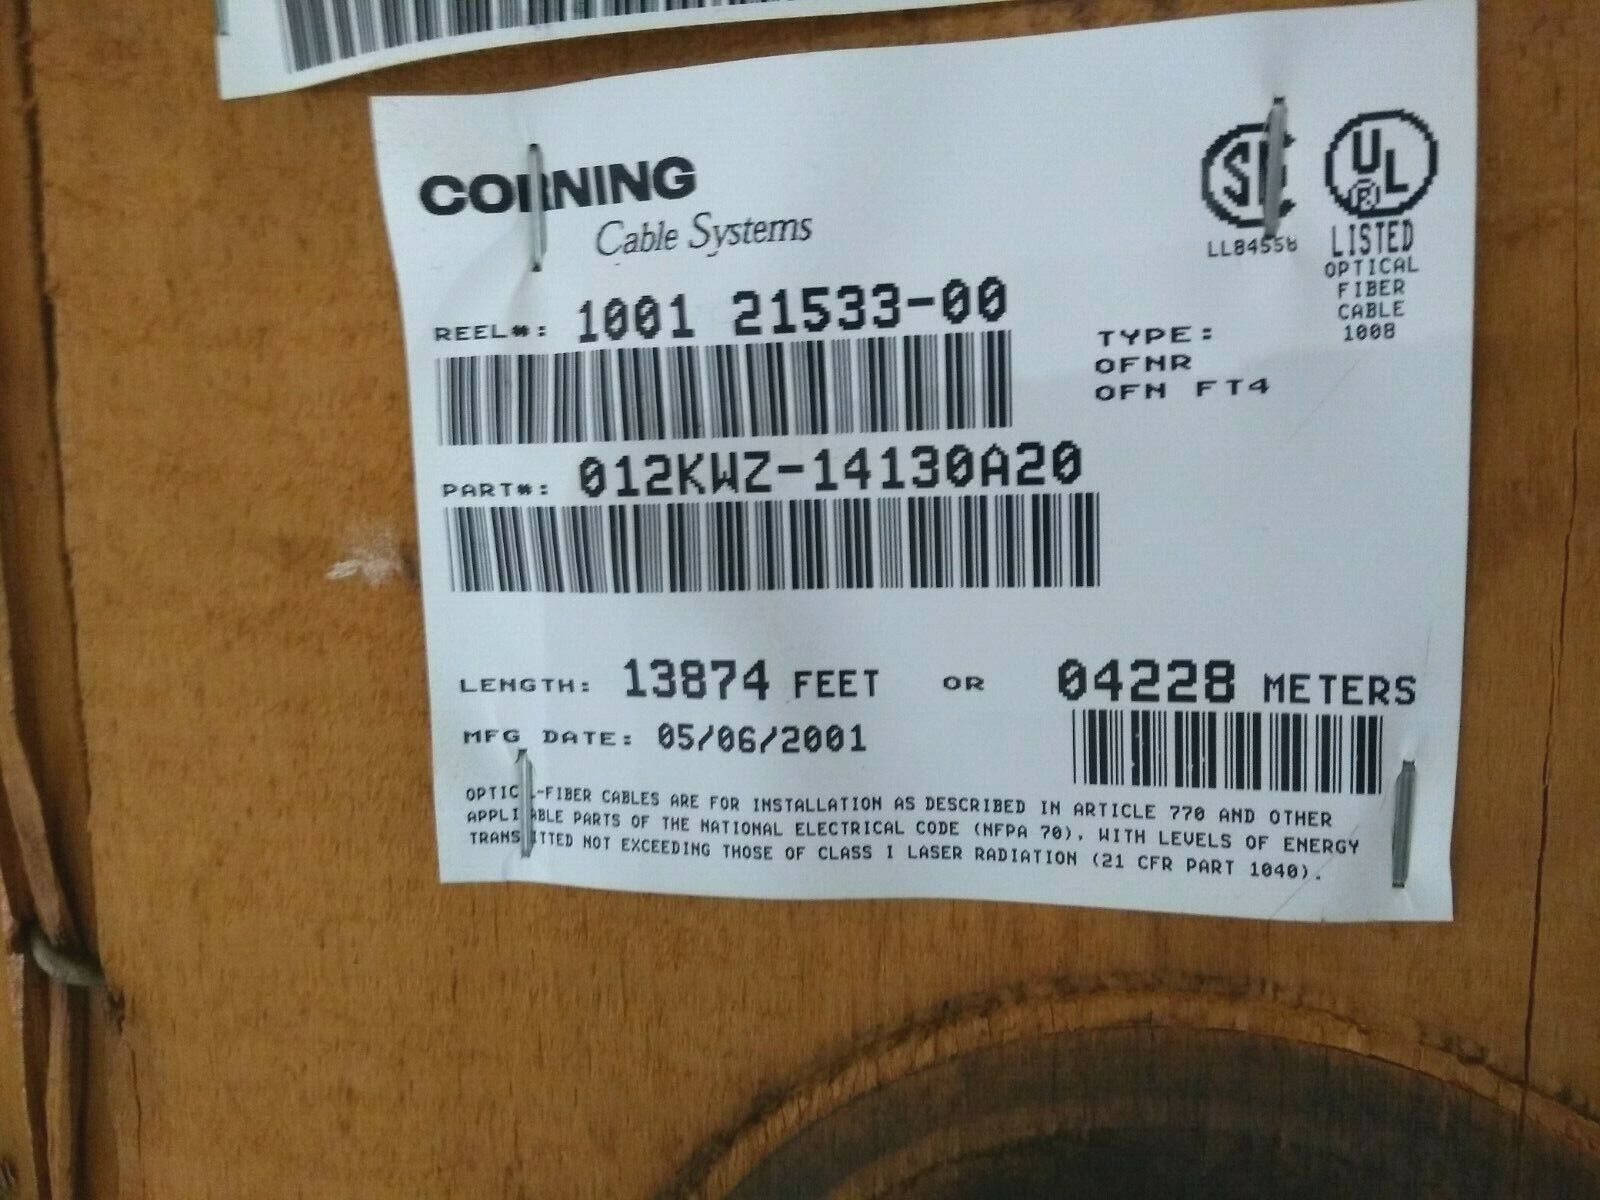 Corning Cable Systems 012KWZ-14130A20 Optical Fiber Cable Spool of 1000 Ft +